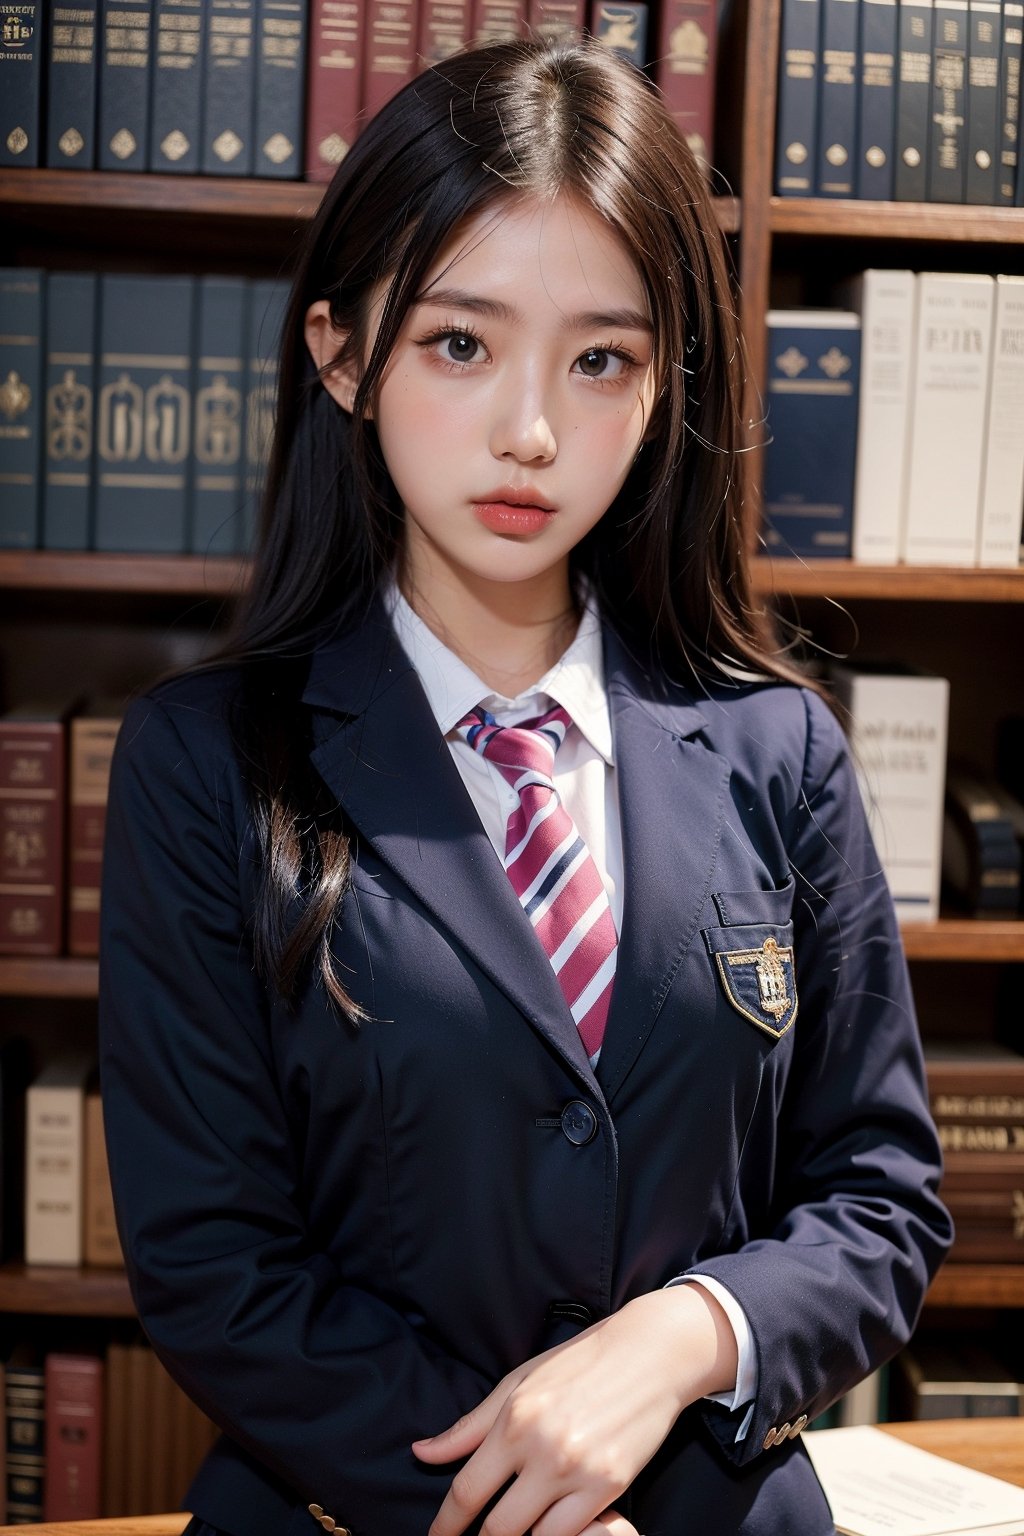 Cool leaning pout school uniform in library